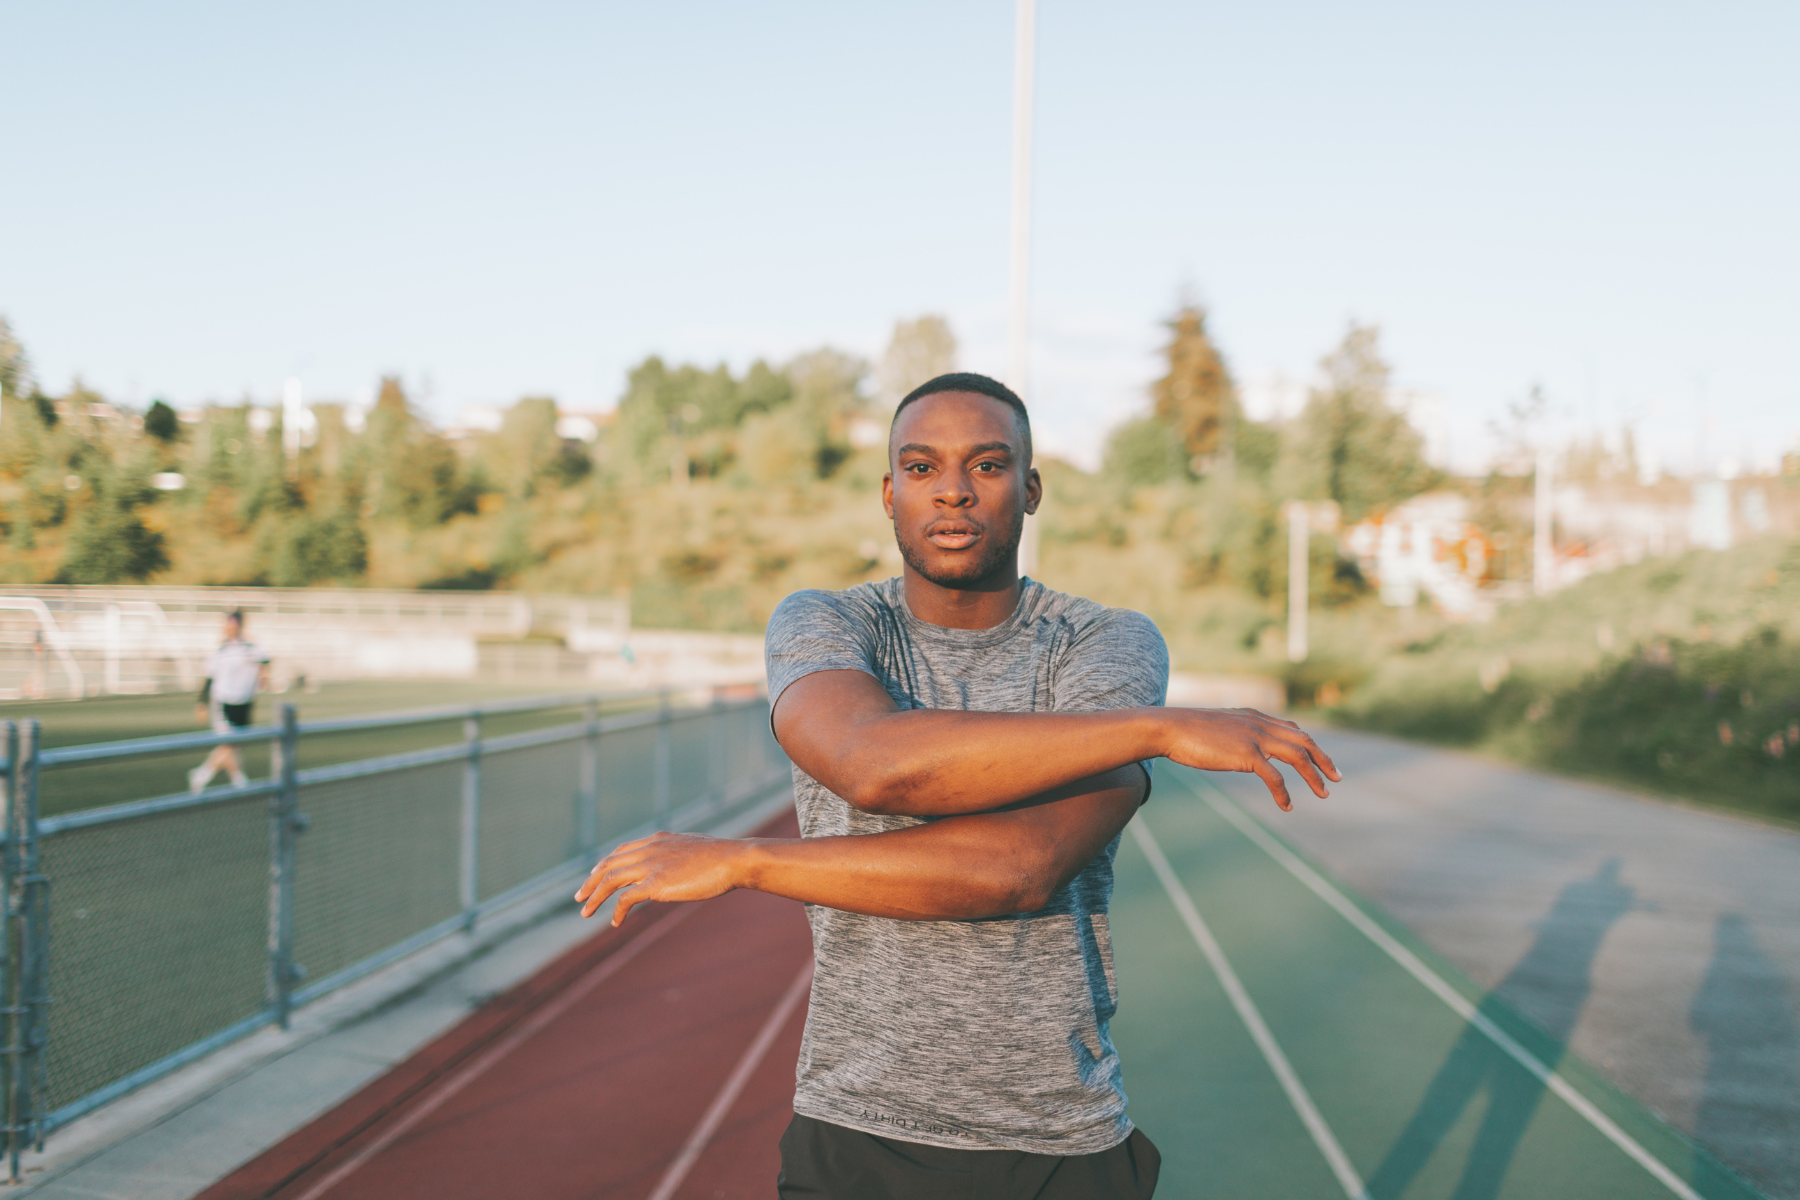 man on running track crossing arms in front of chest